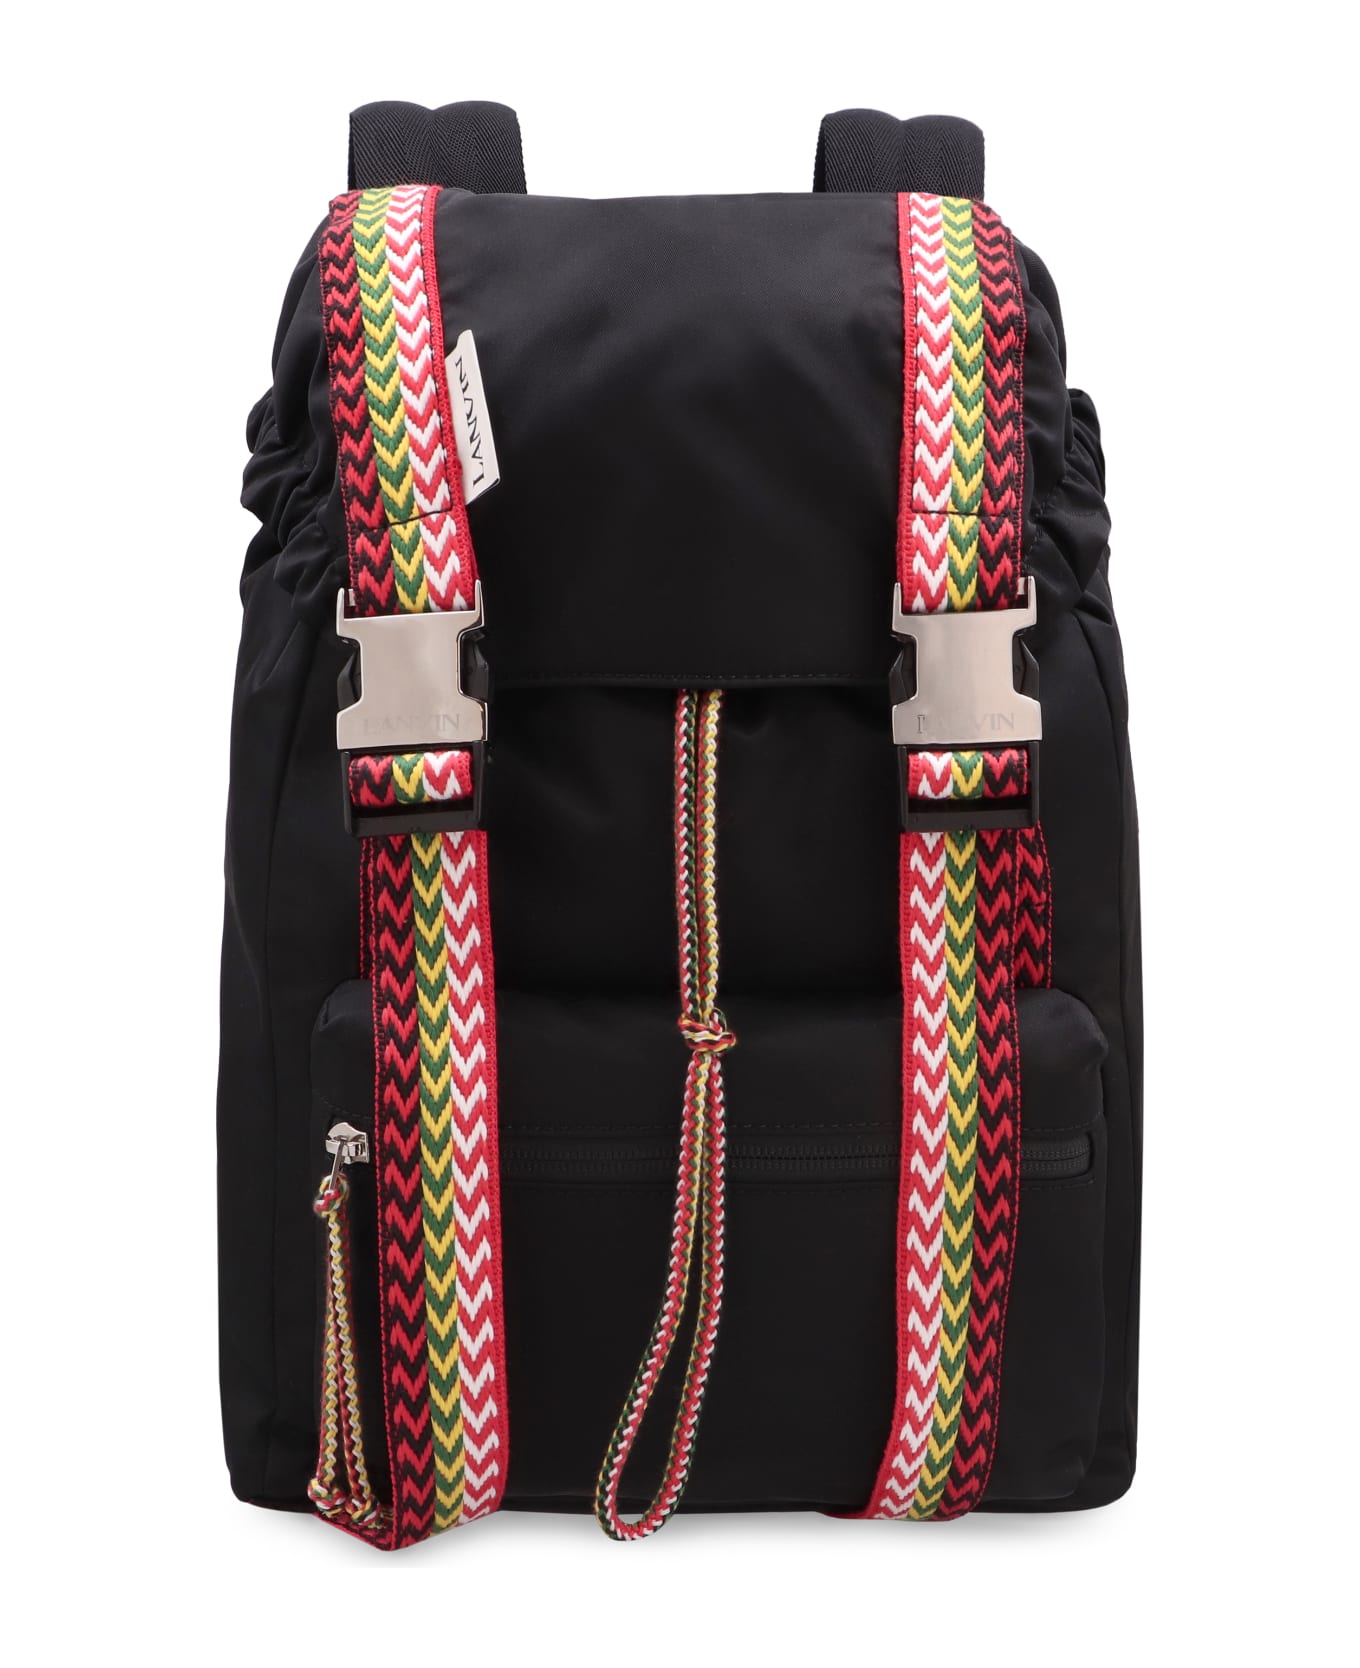 Lanvin Black Nylon Backpack With Curb Ribbons - Black バックパック